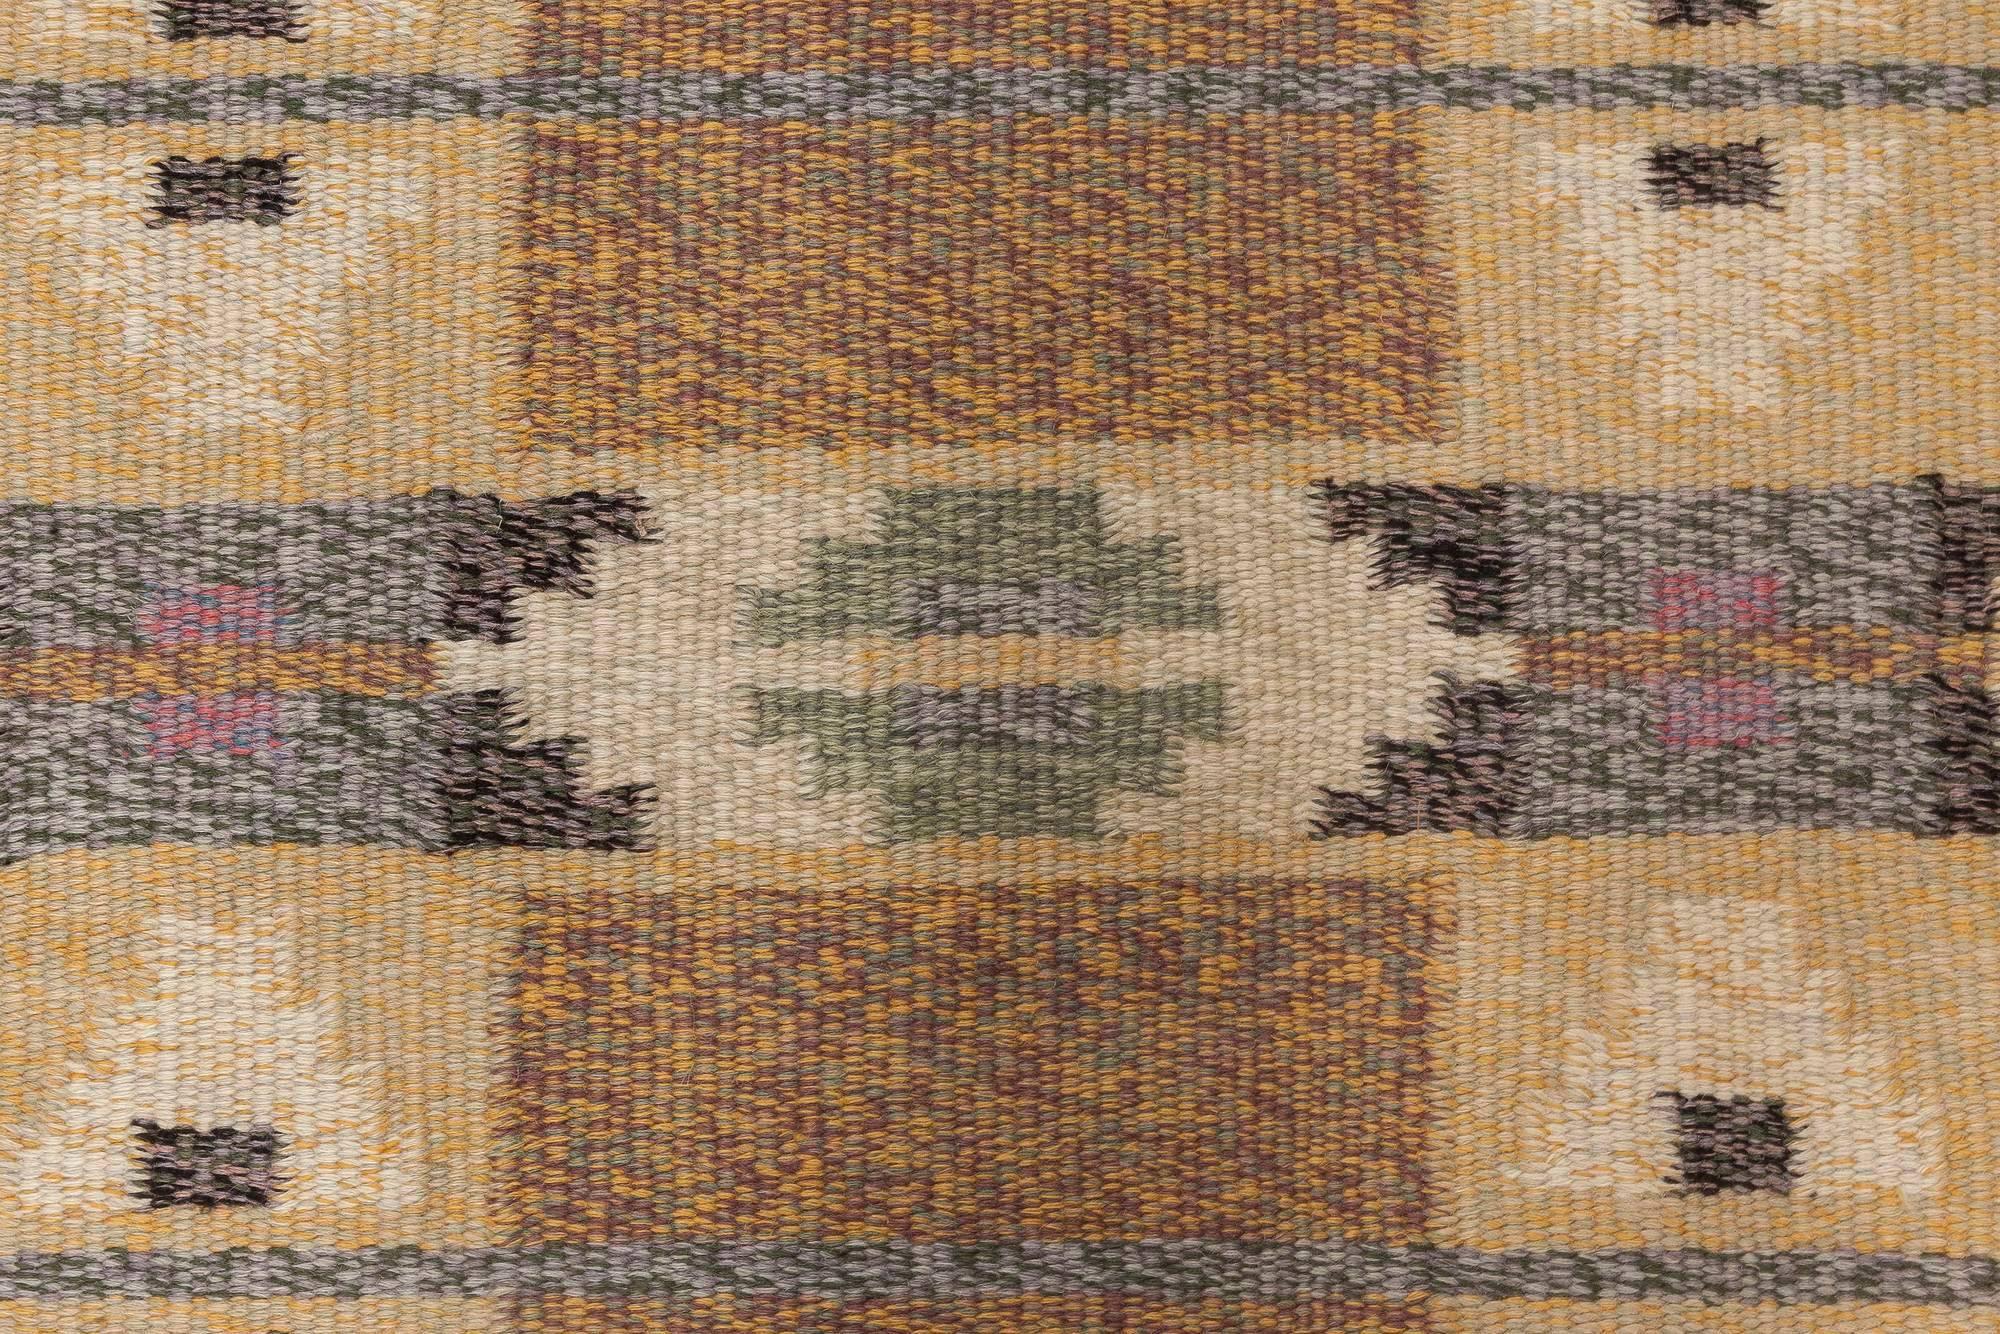 Midcentury Swedish Geometric flat-woven wool rug in beige, gray and brown
Size: 4'5